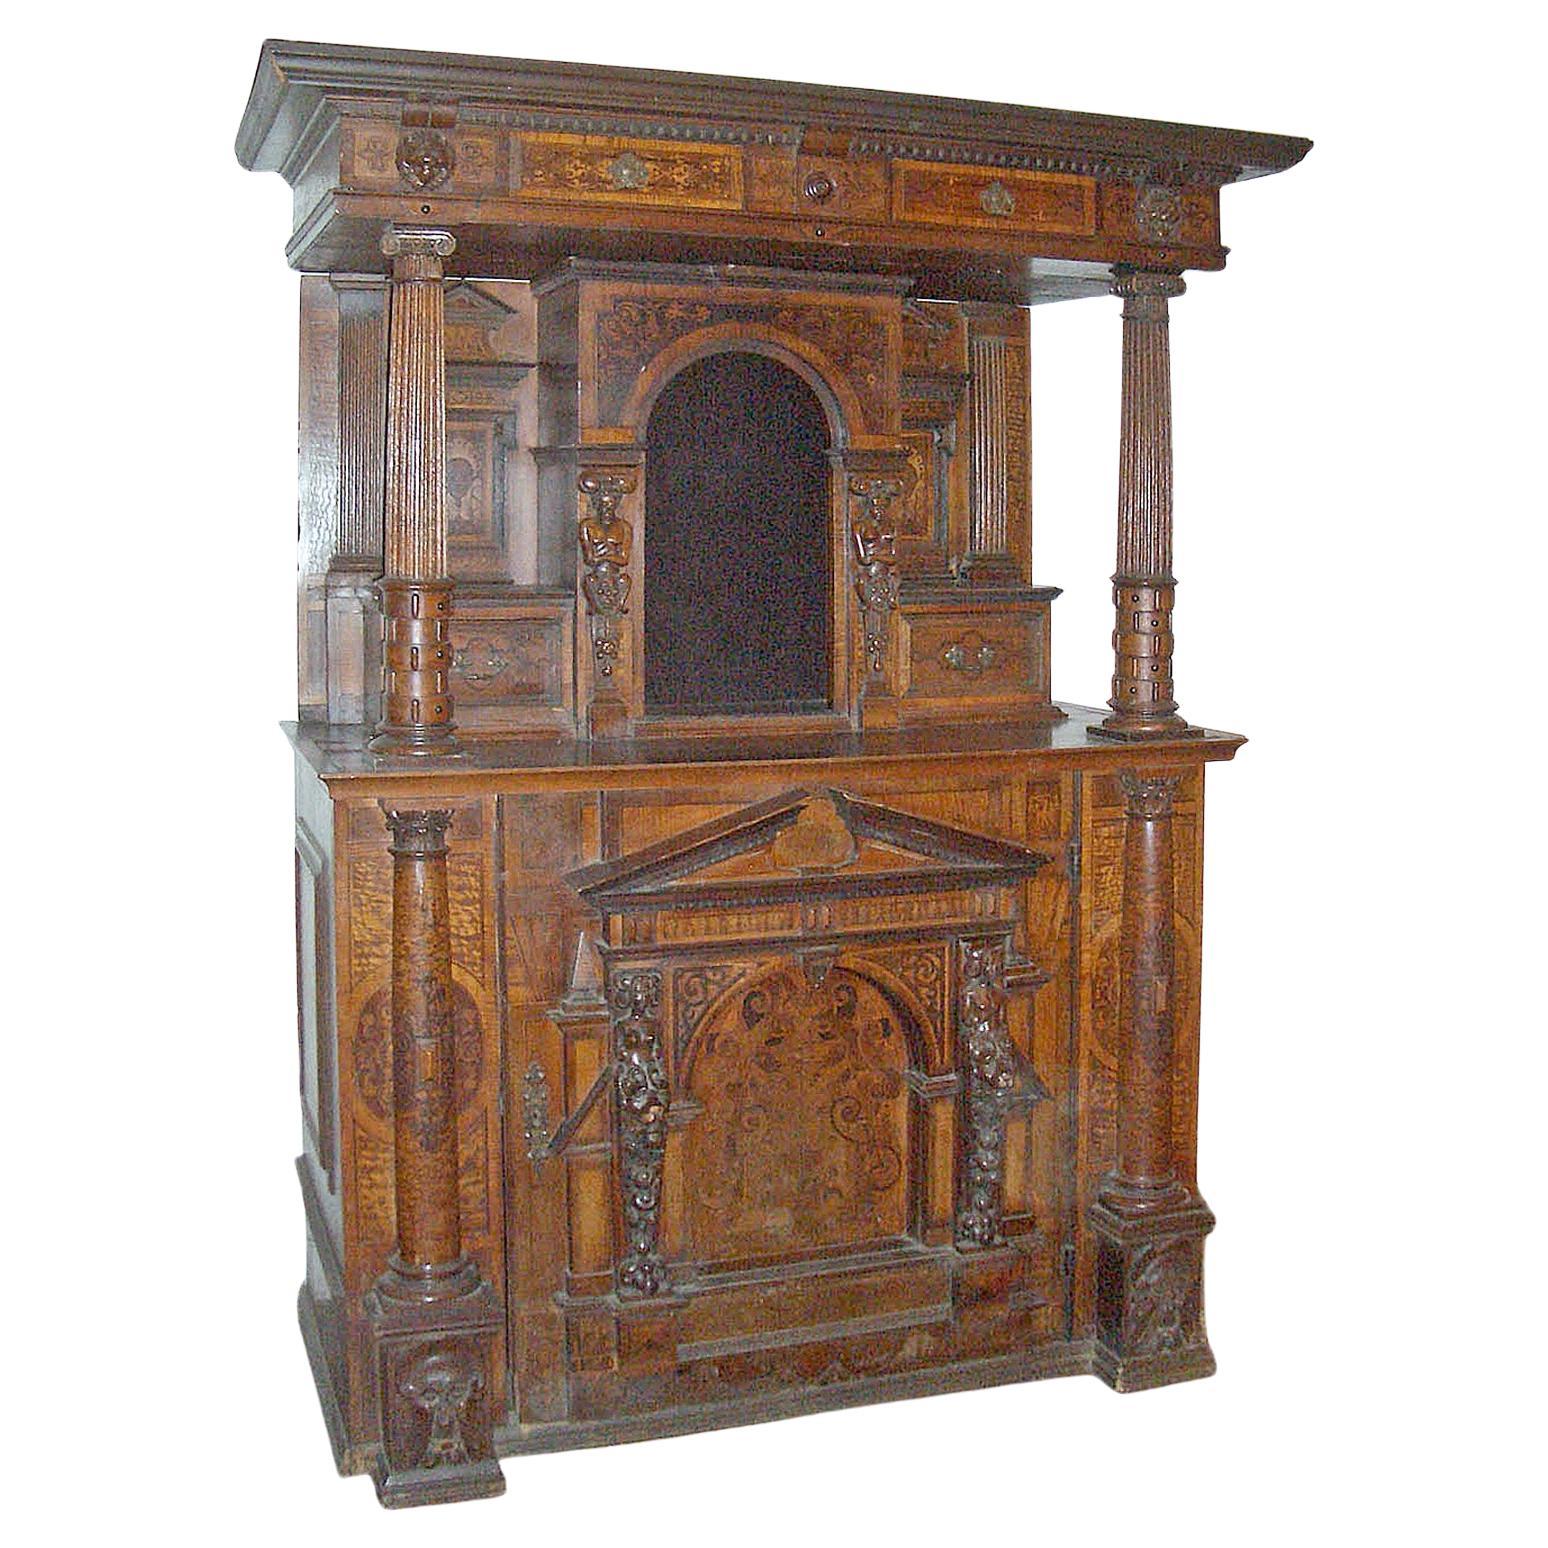 German or Swiss Late Renaissance / Baroque 17th Century Inlaid Buffet Cabinet For Sale